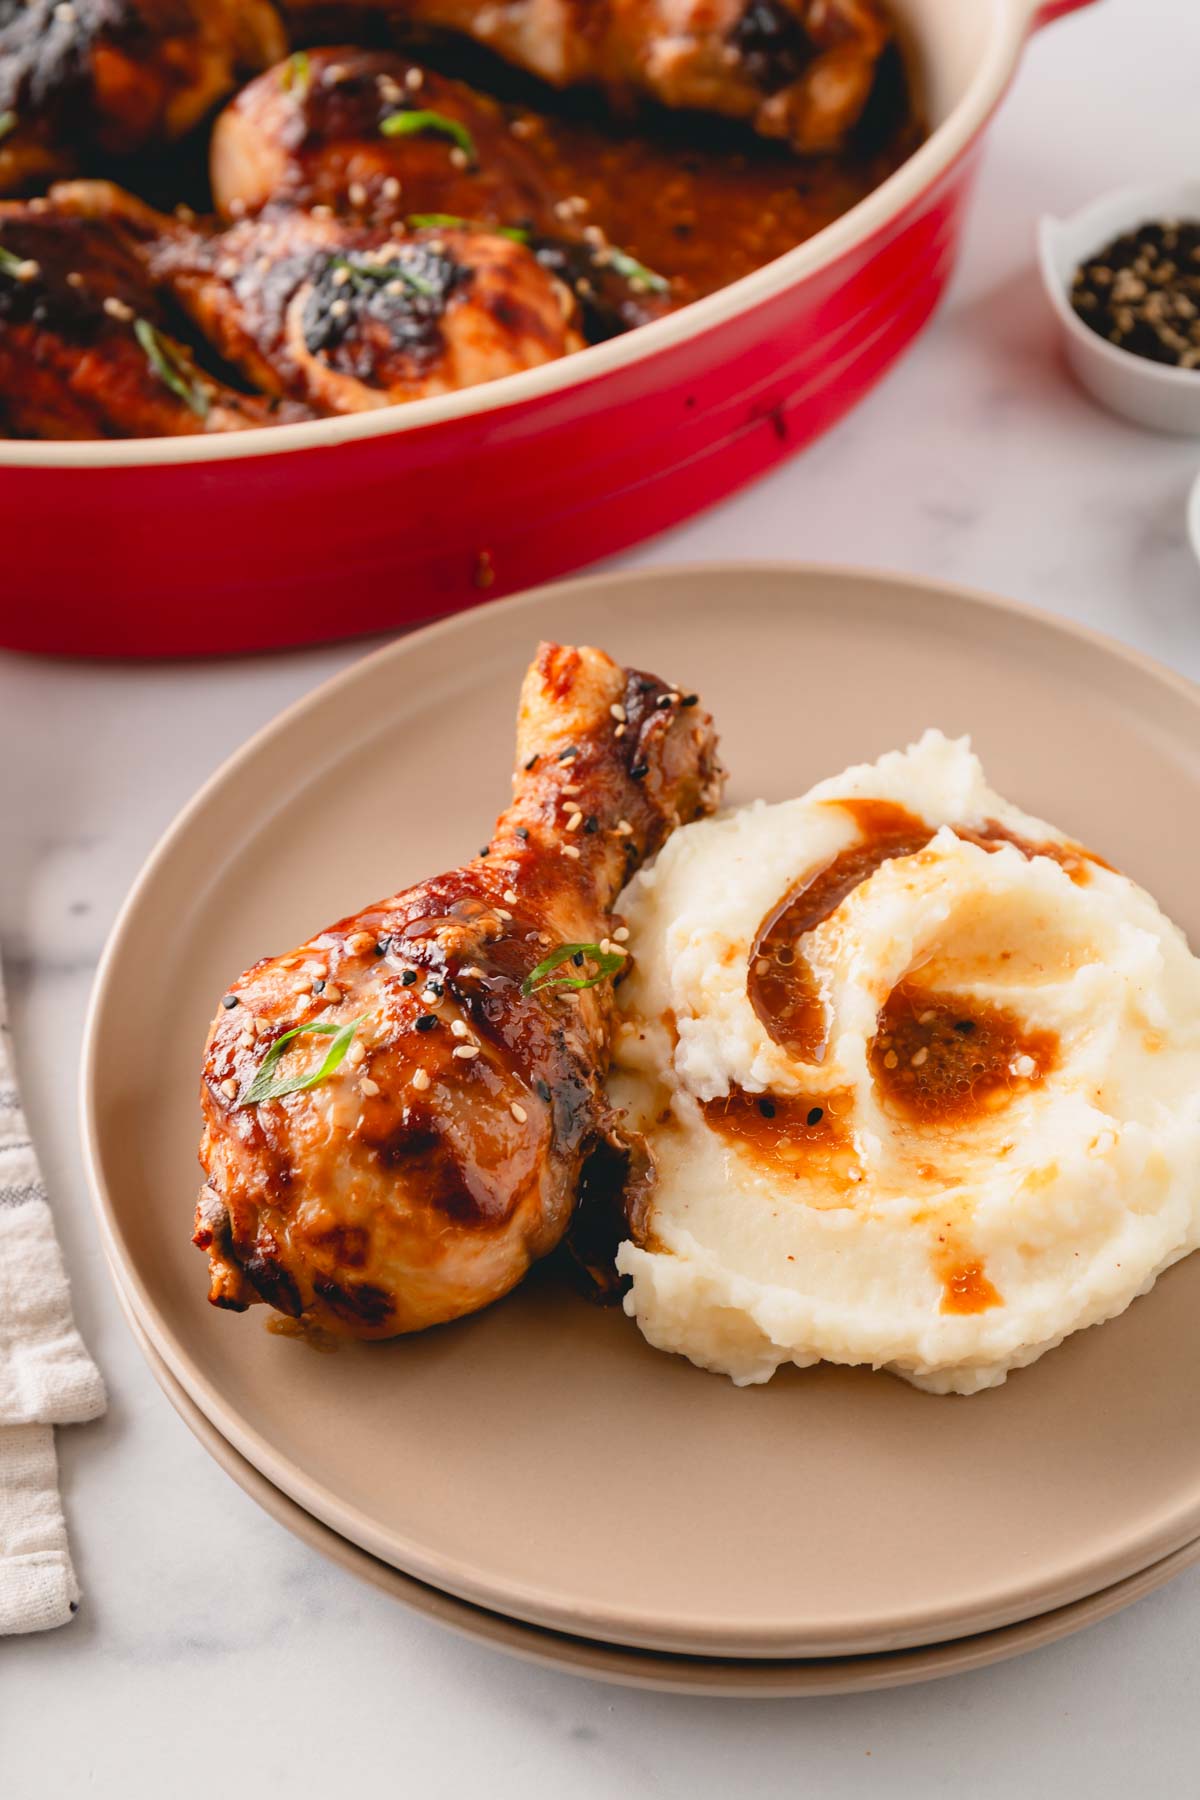 A miso chicken drumstick on a plate with mashed potatoes.